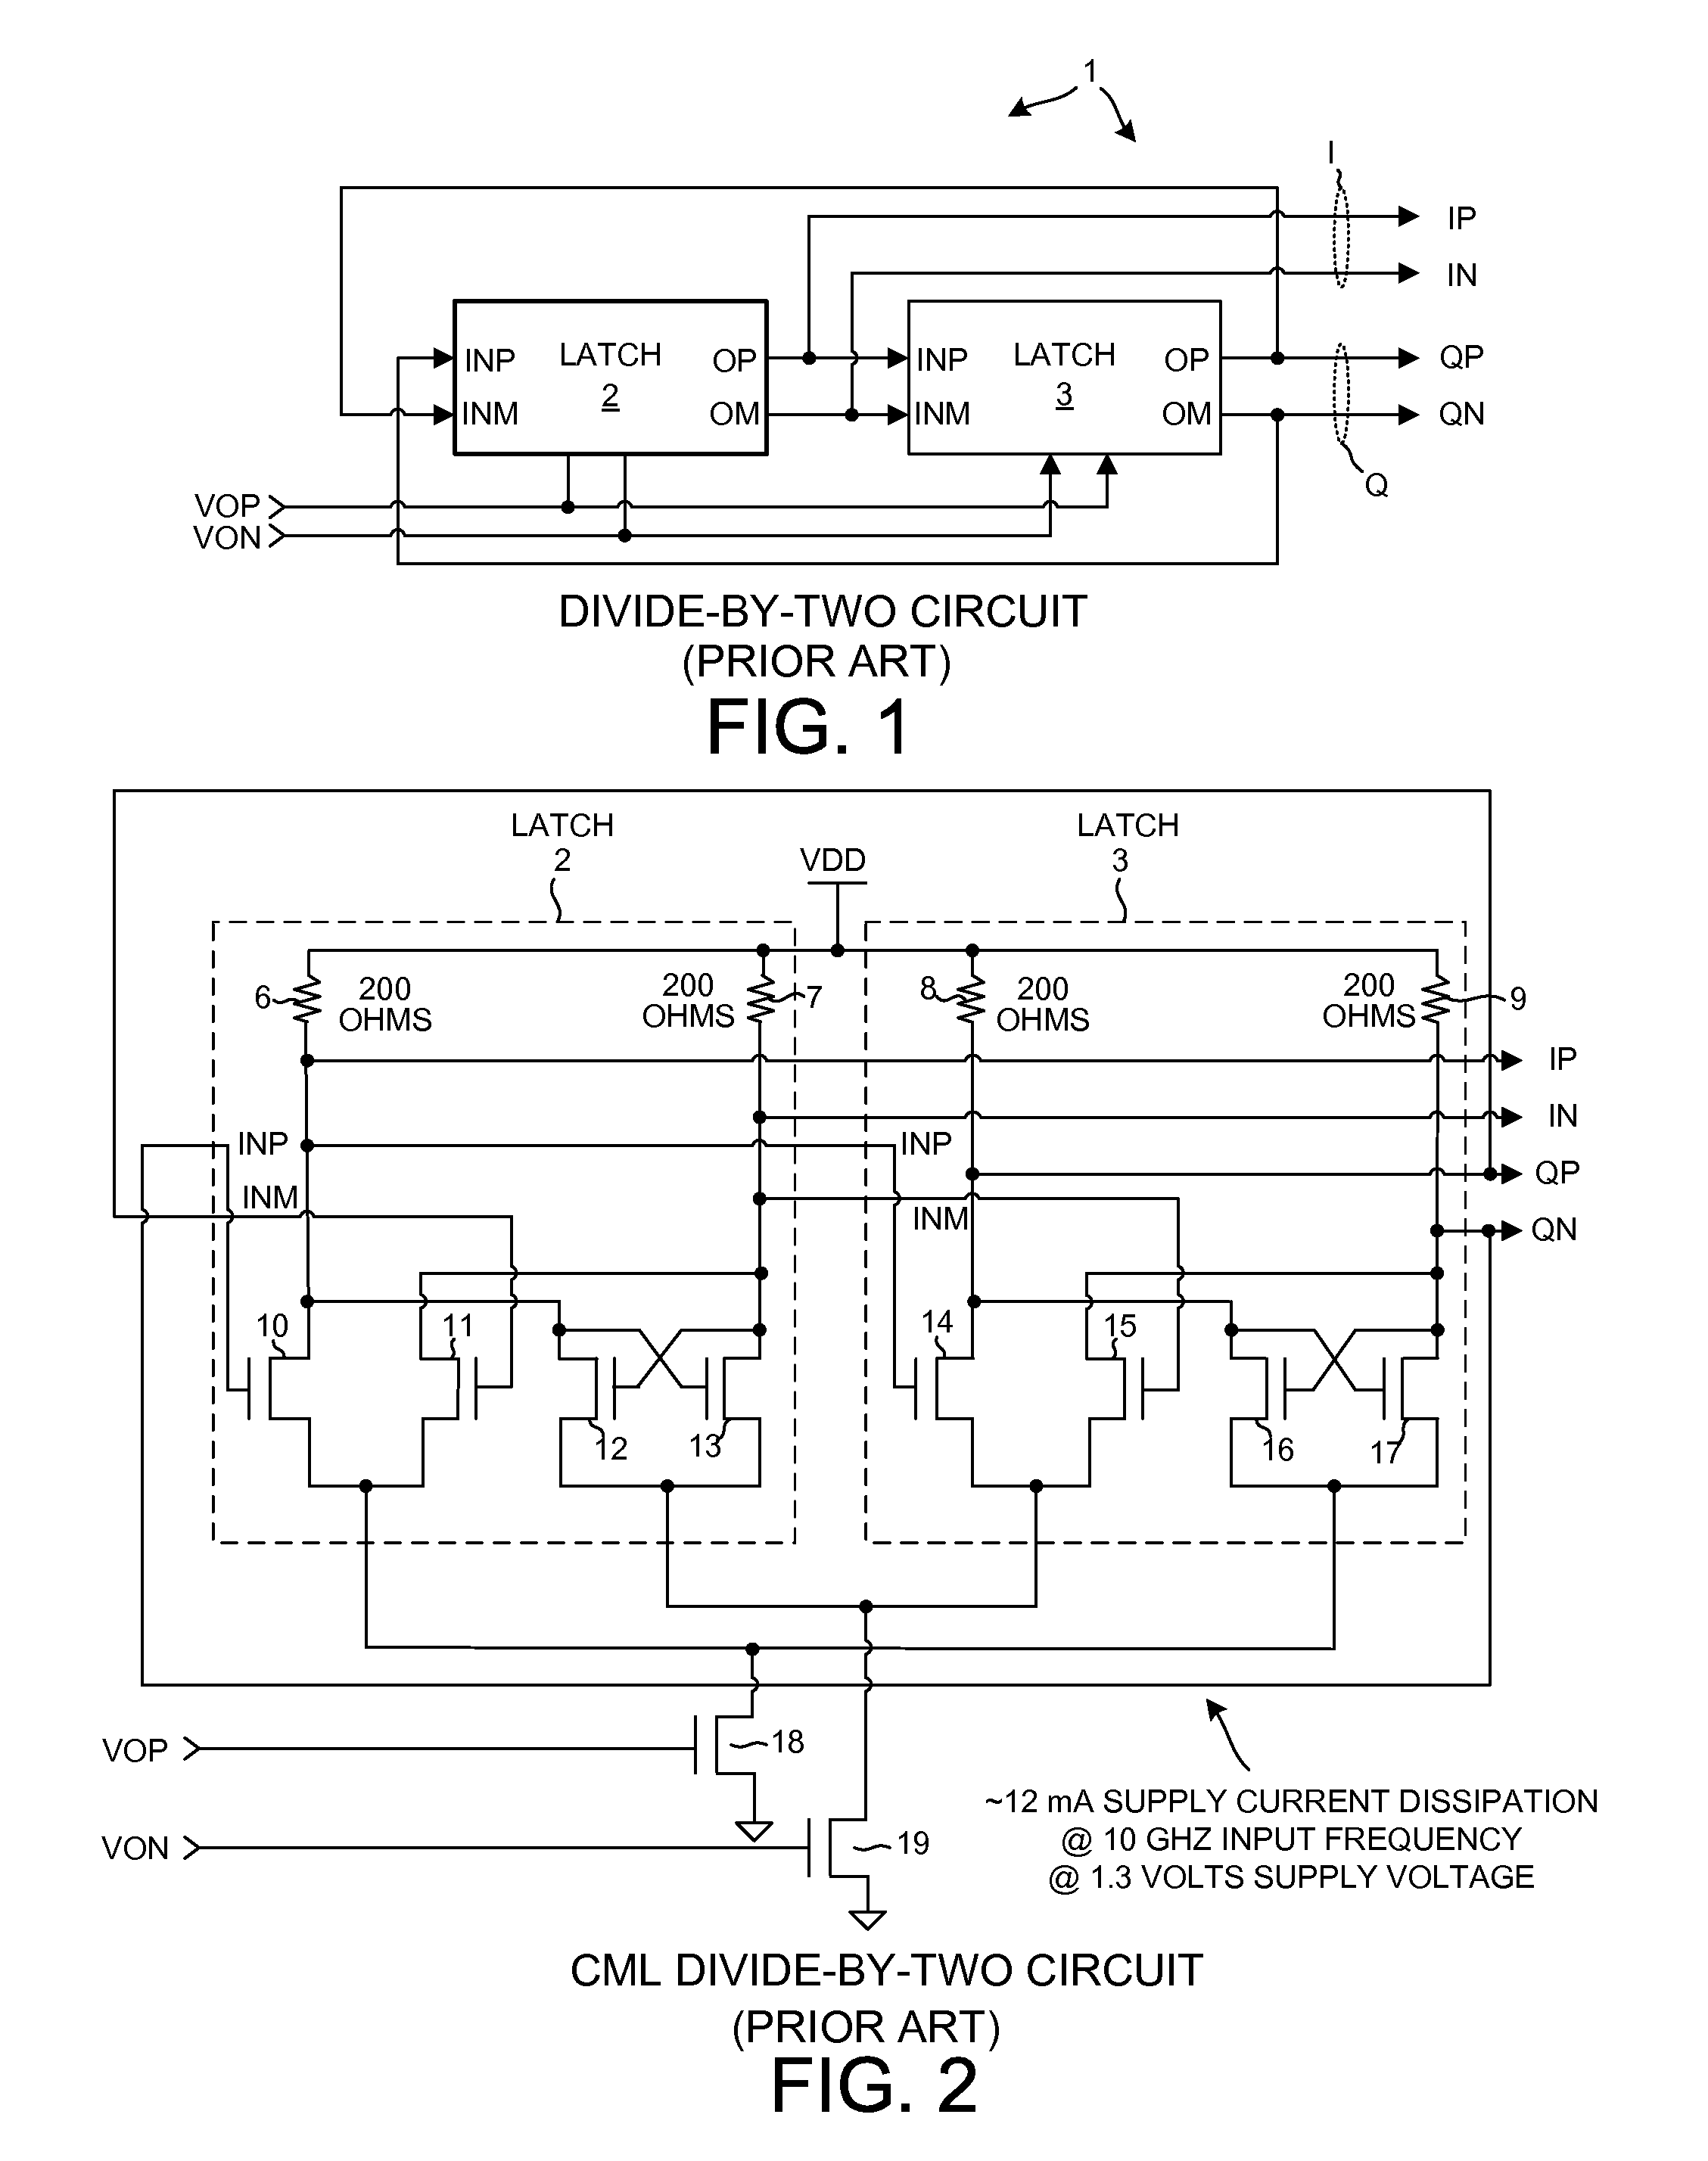 Low power complementary logic latch and RF divider